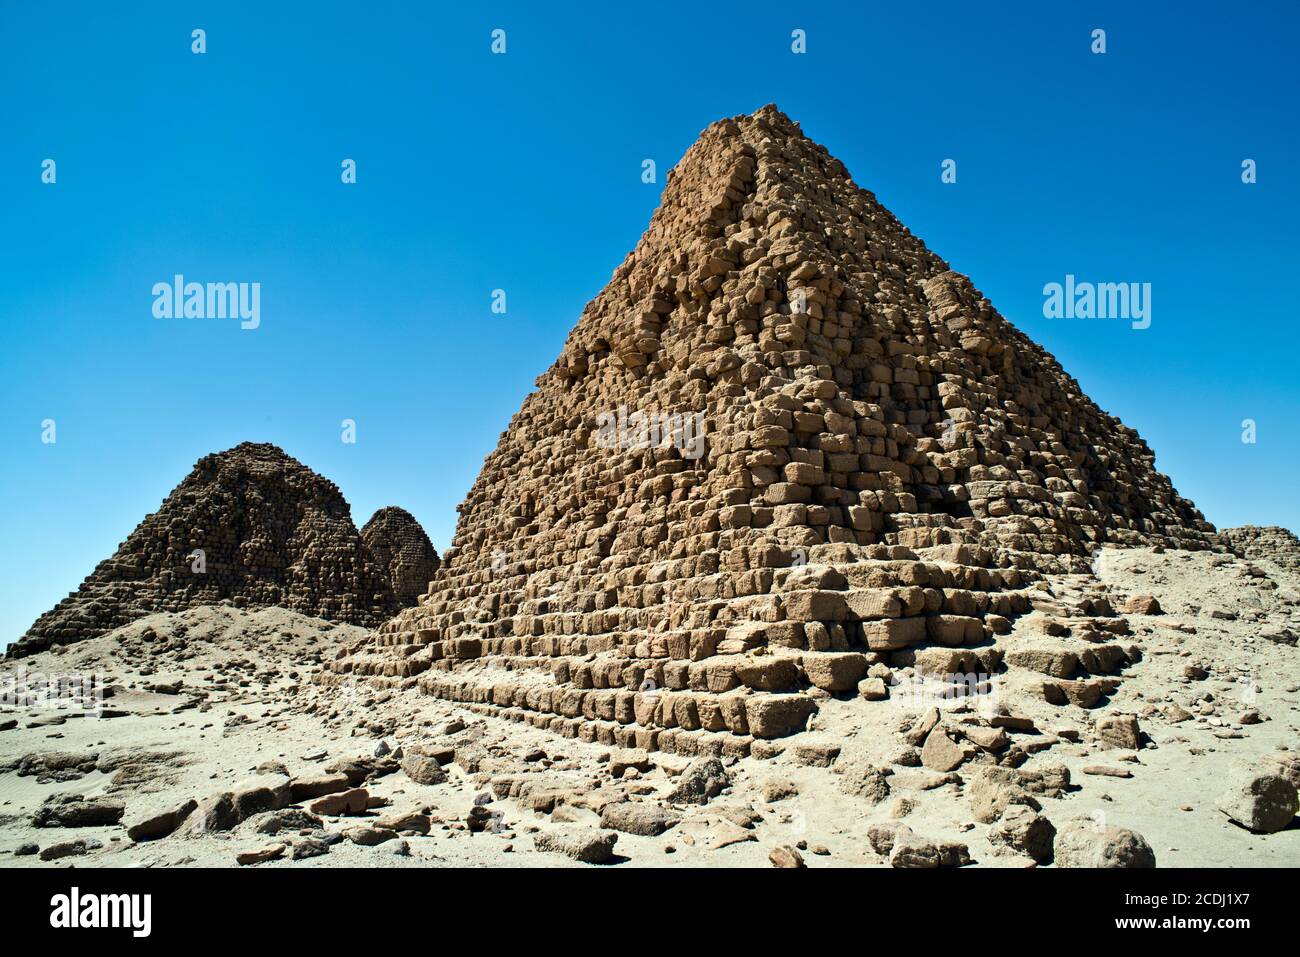 Ancient pyramids and temples built by the Kush Empire, in Nuri, Sudan Stock Photo